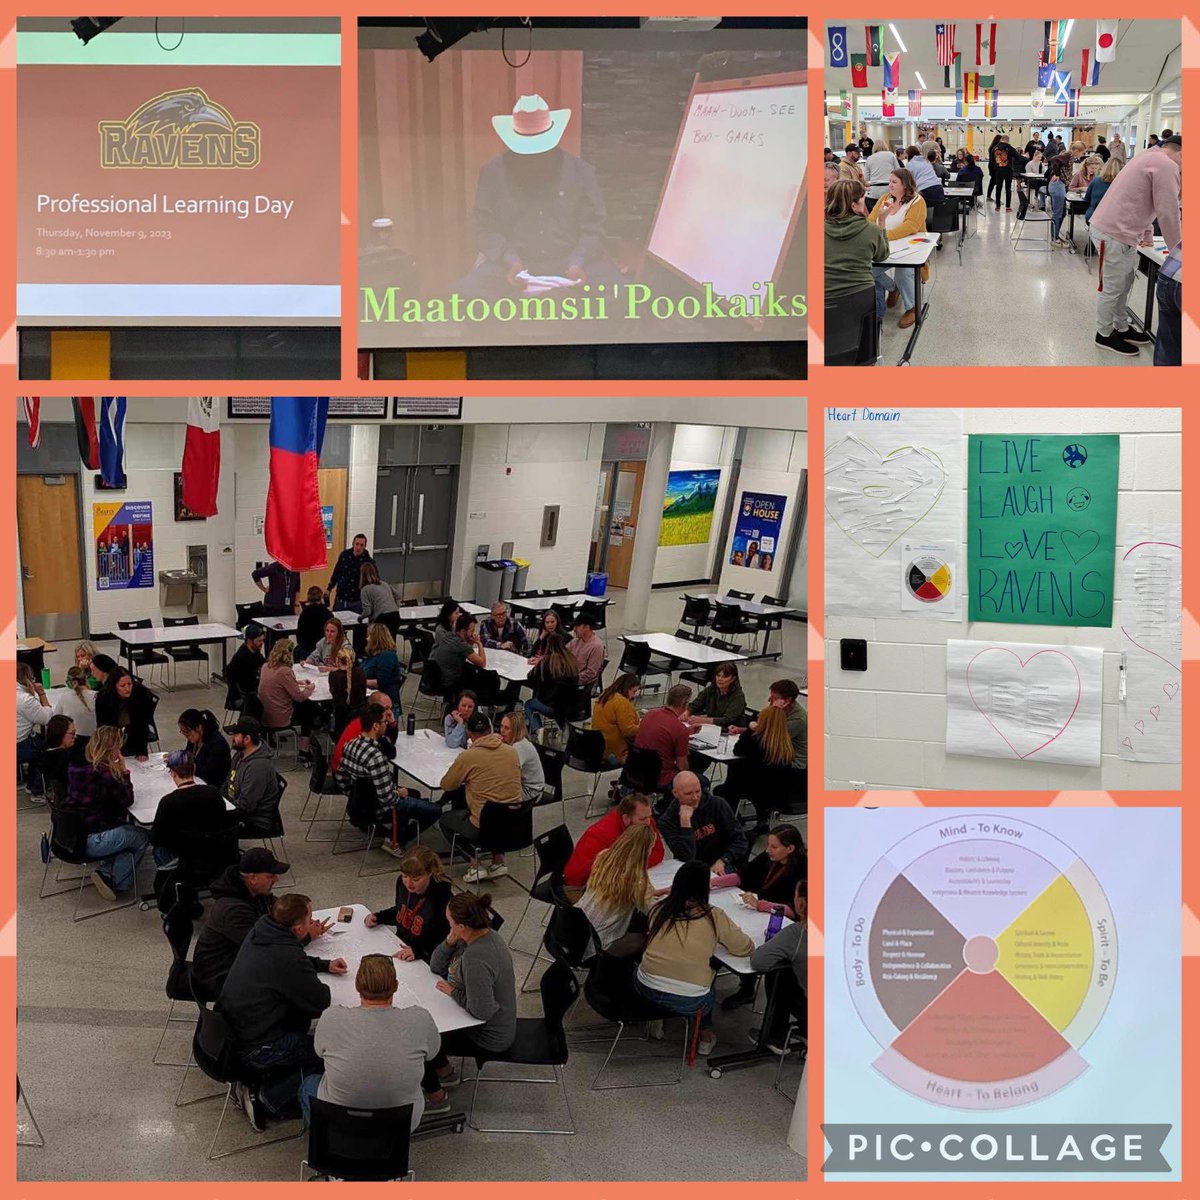 Grateful for the wisdom of the Elders & insights of the Ss shared during today's PD. @JCS_Ravens engaged in collaborative conversations of fostering 'Heart- Belonging' in our classrooms. #CBEindigenousEd #weareCBE #MaatoomsiiPookaiks @Indigenous_cbe @JoannePitman5 @yycmay